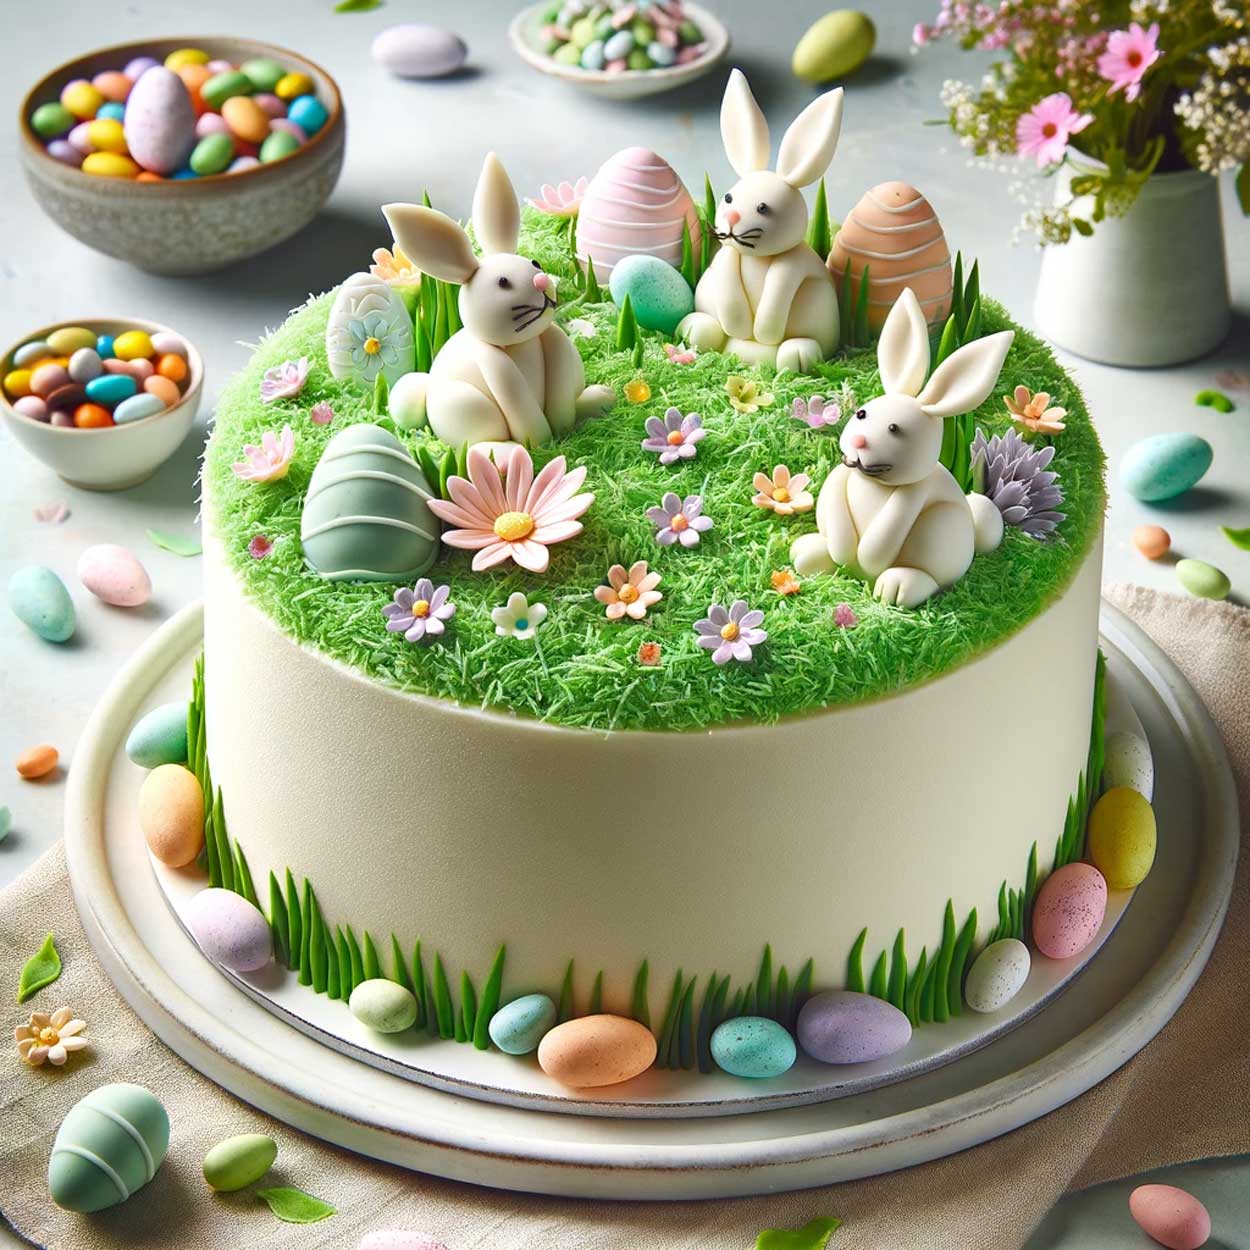 Easter dessert recipes features a bunny garden cake that is a charming centerpiece for a baby shower.